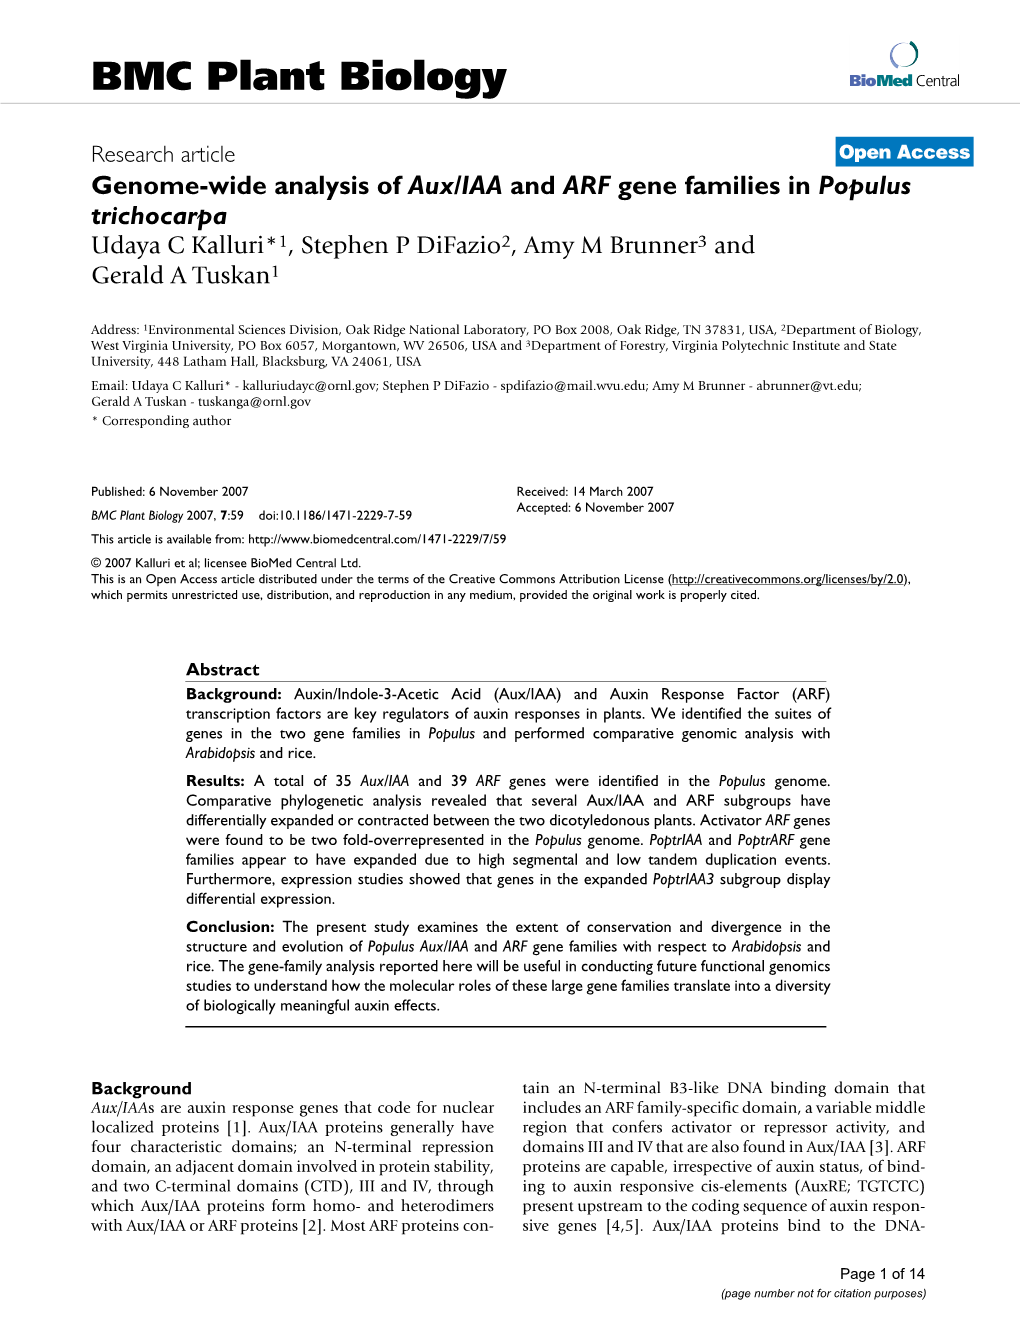 Genome-Wide Analysis of Aux/IAA and ARF Gene Families in Populus Trichocarpa Udaya C Kalluri*1, Stephen P Difazio2, Amymbrunner3 and Gerald a Tuskan1